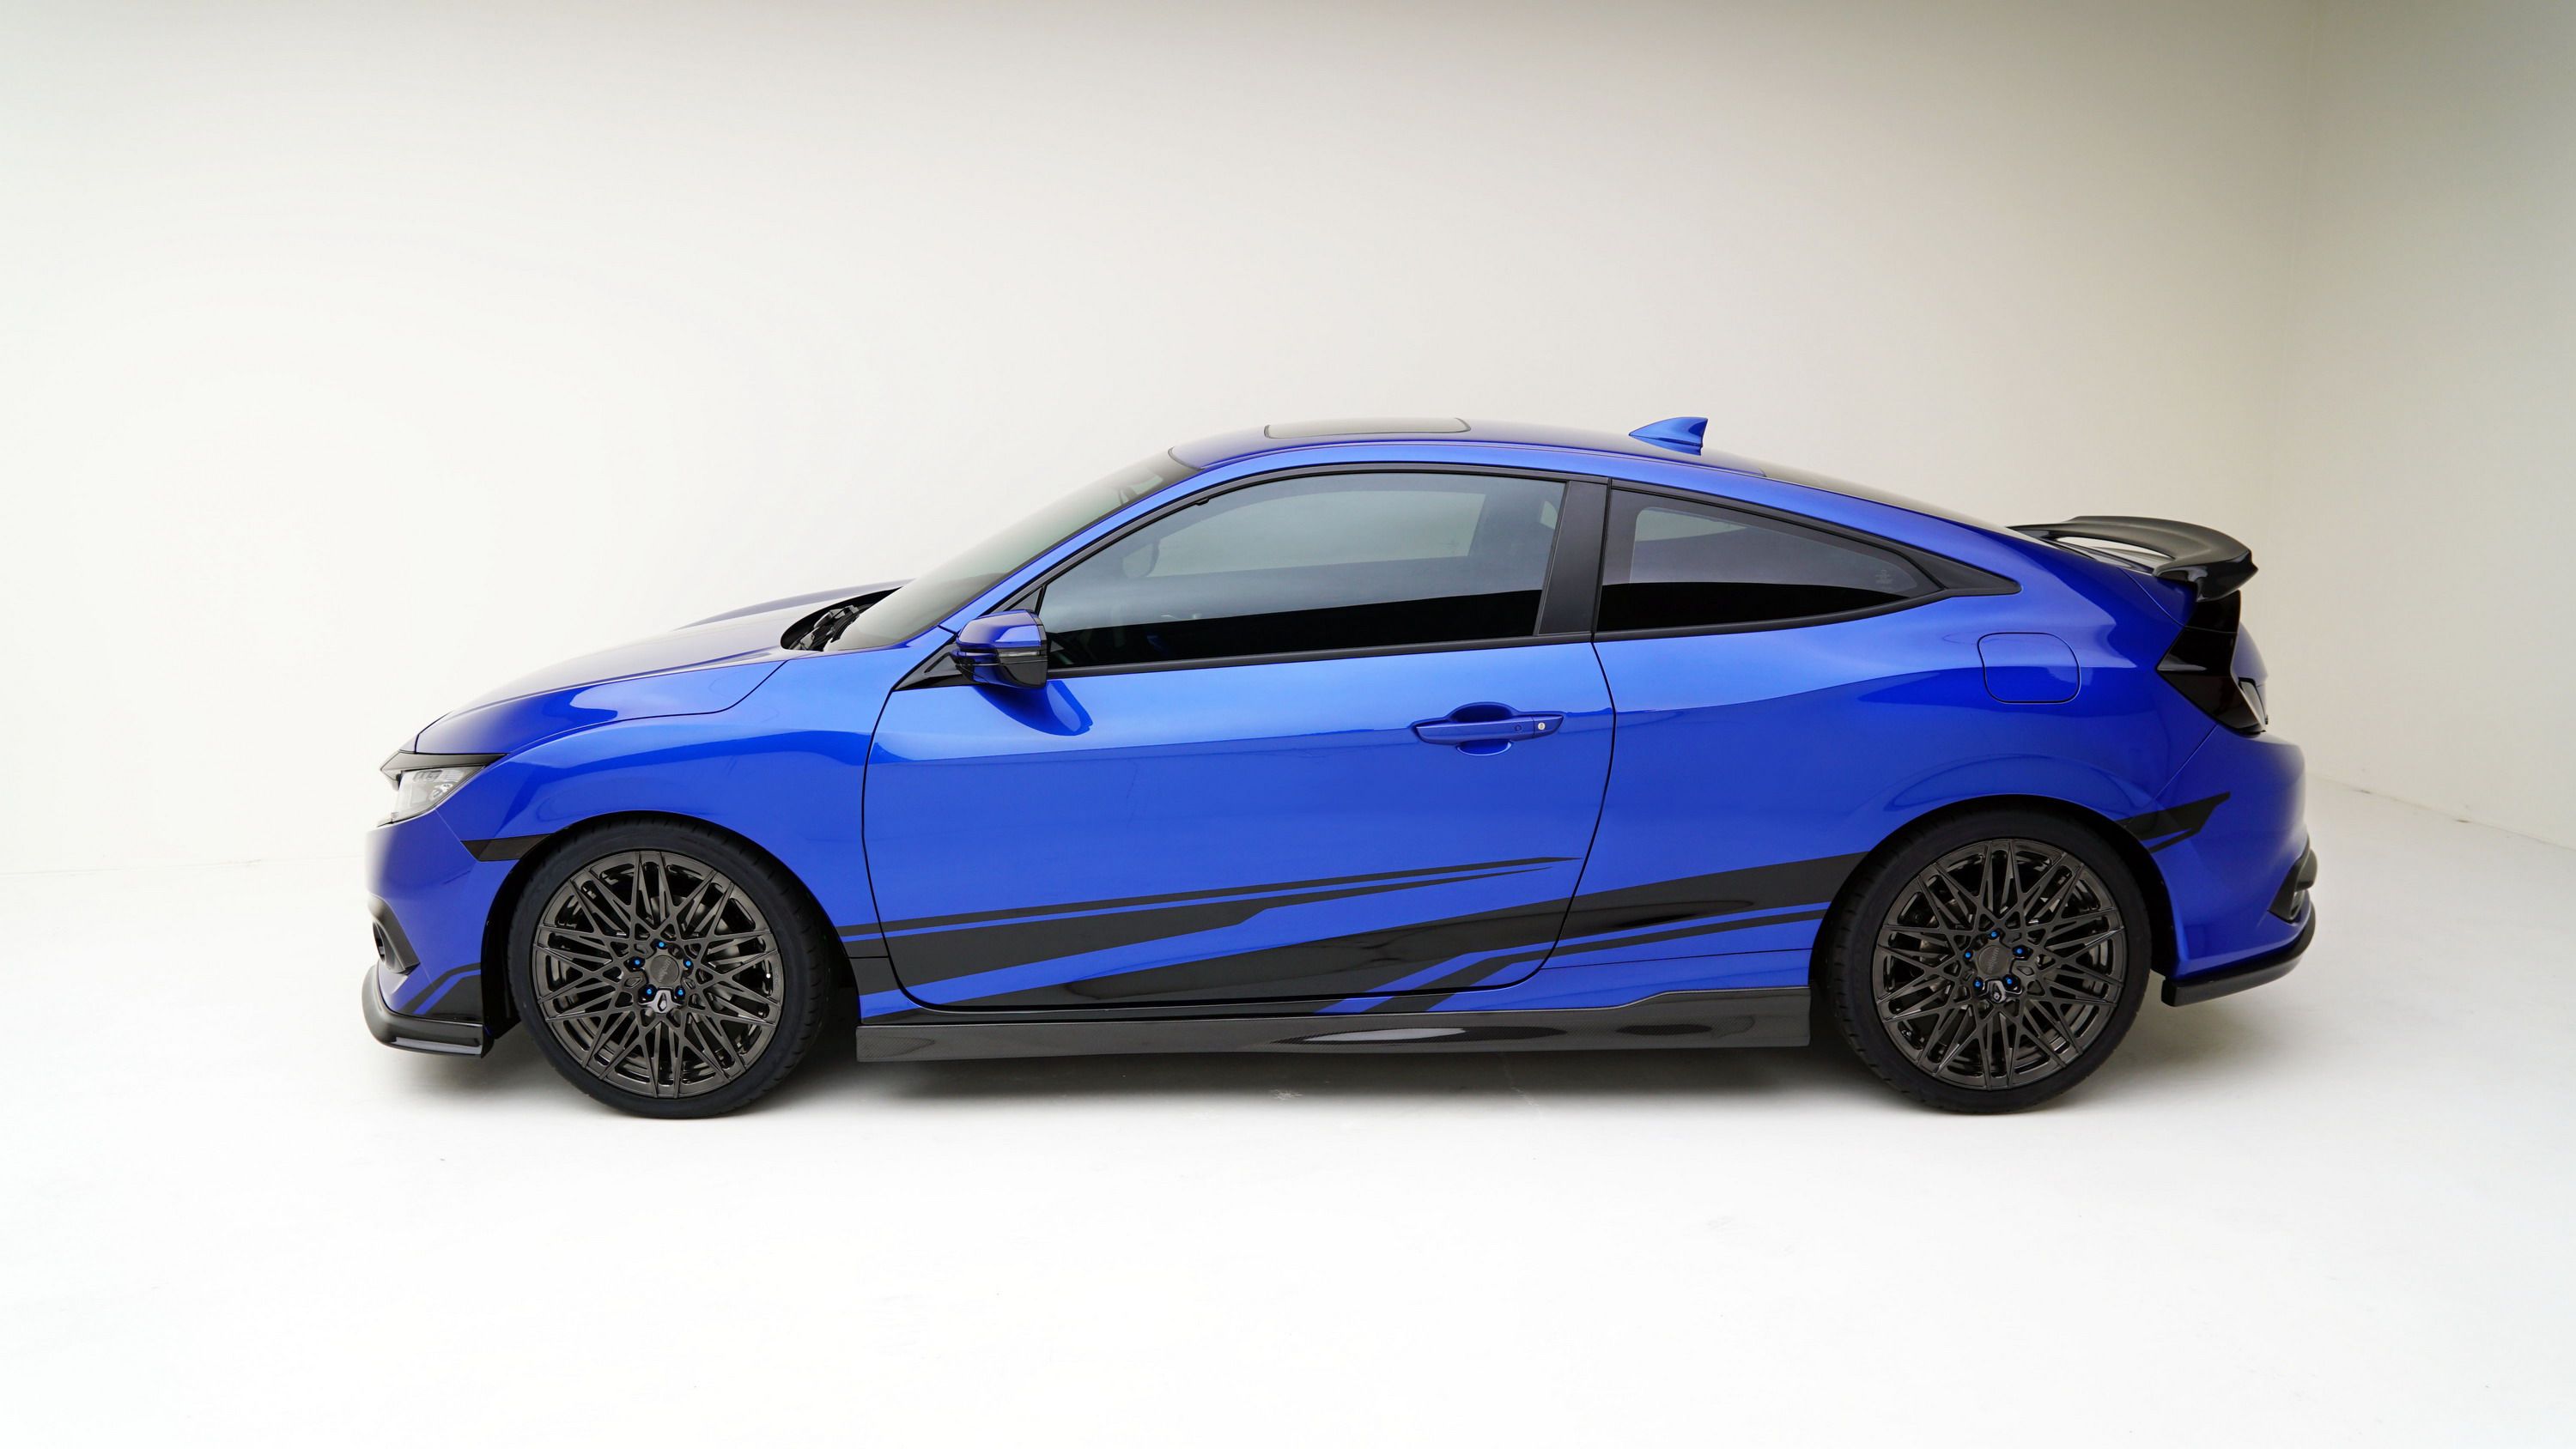 2016 Honda Civic Coupe By MAD Industries